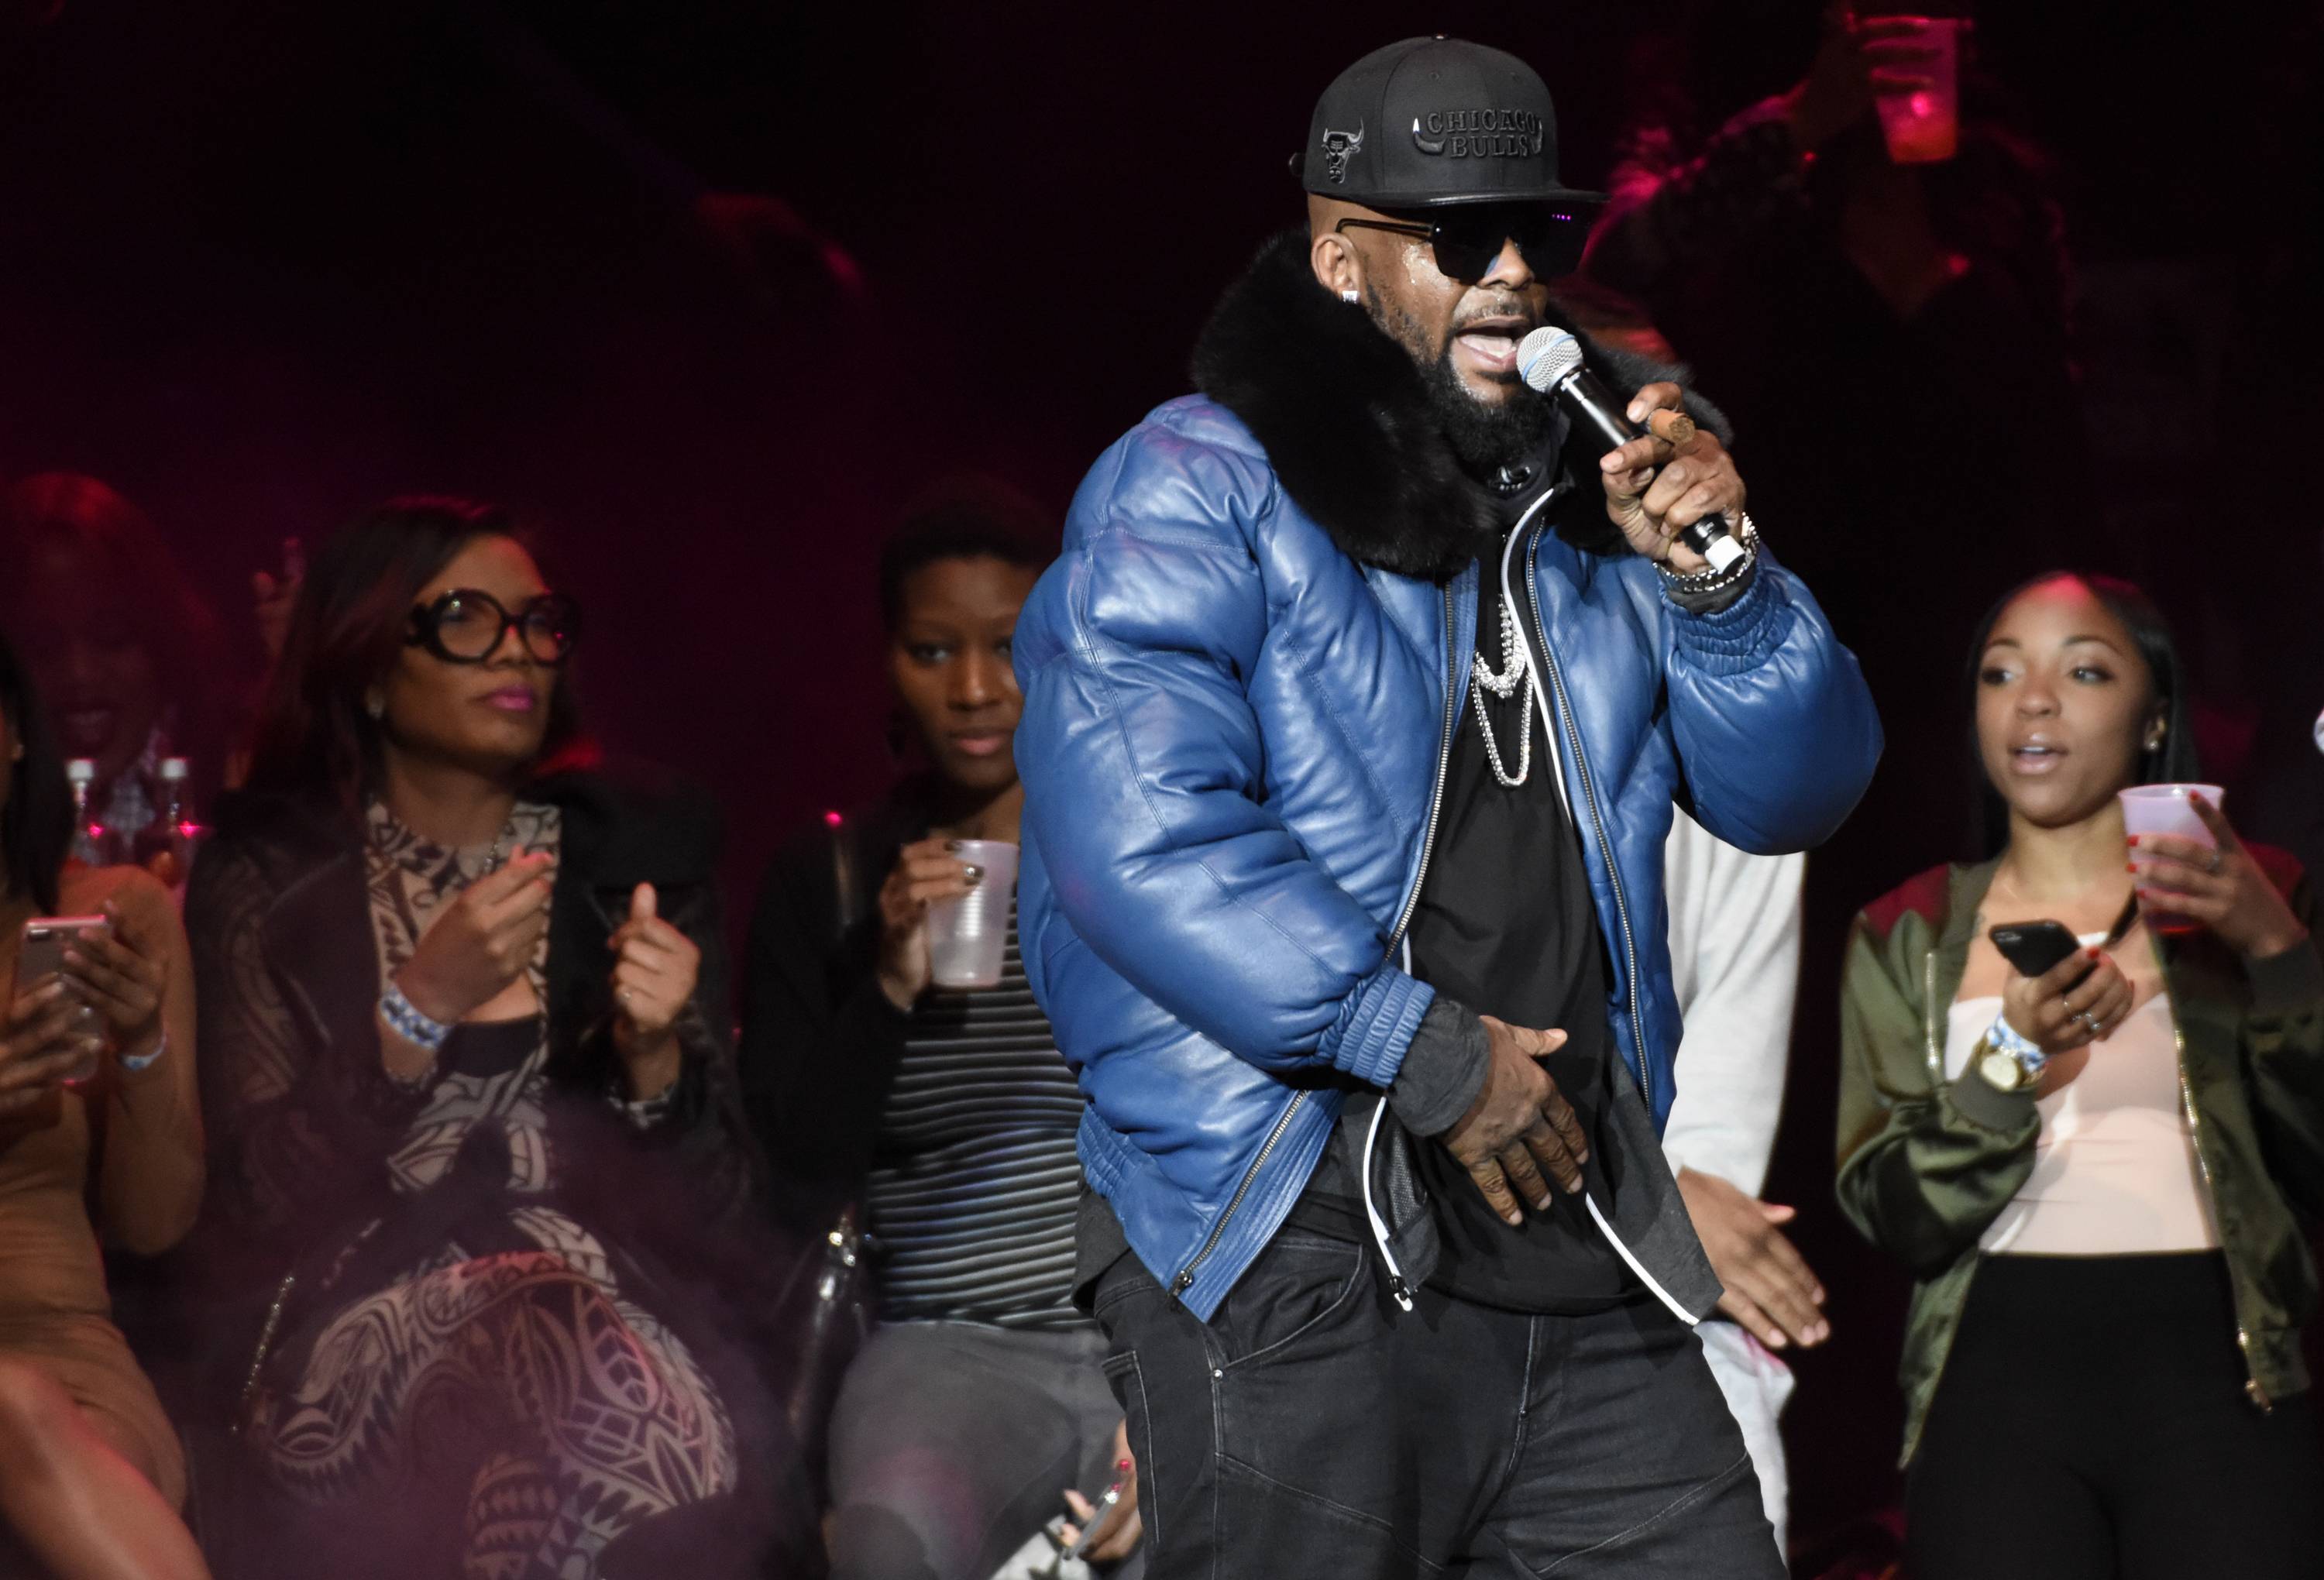 This Latest Video Of R. Kelly On Stage Is Actually Disturbing | News | BET